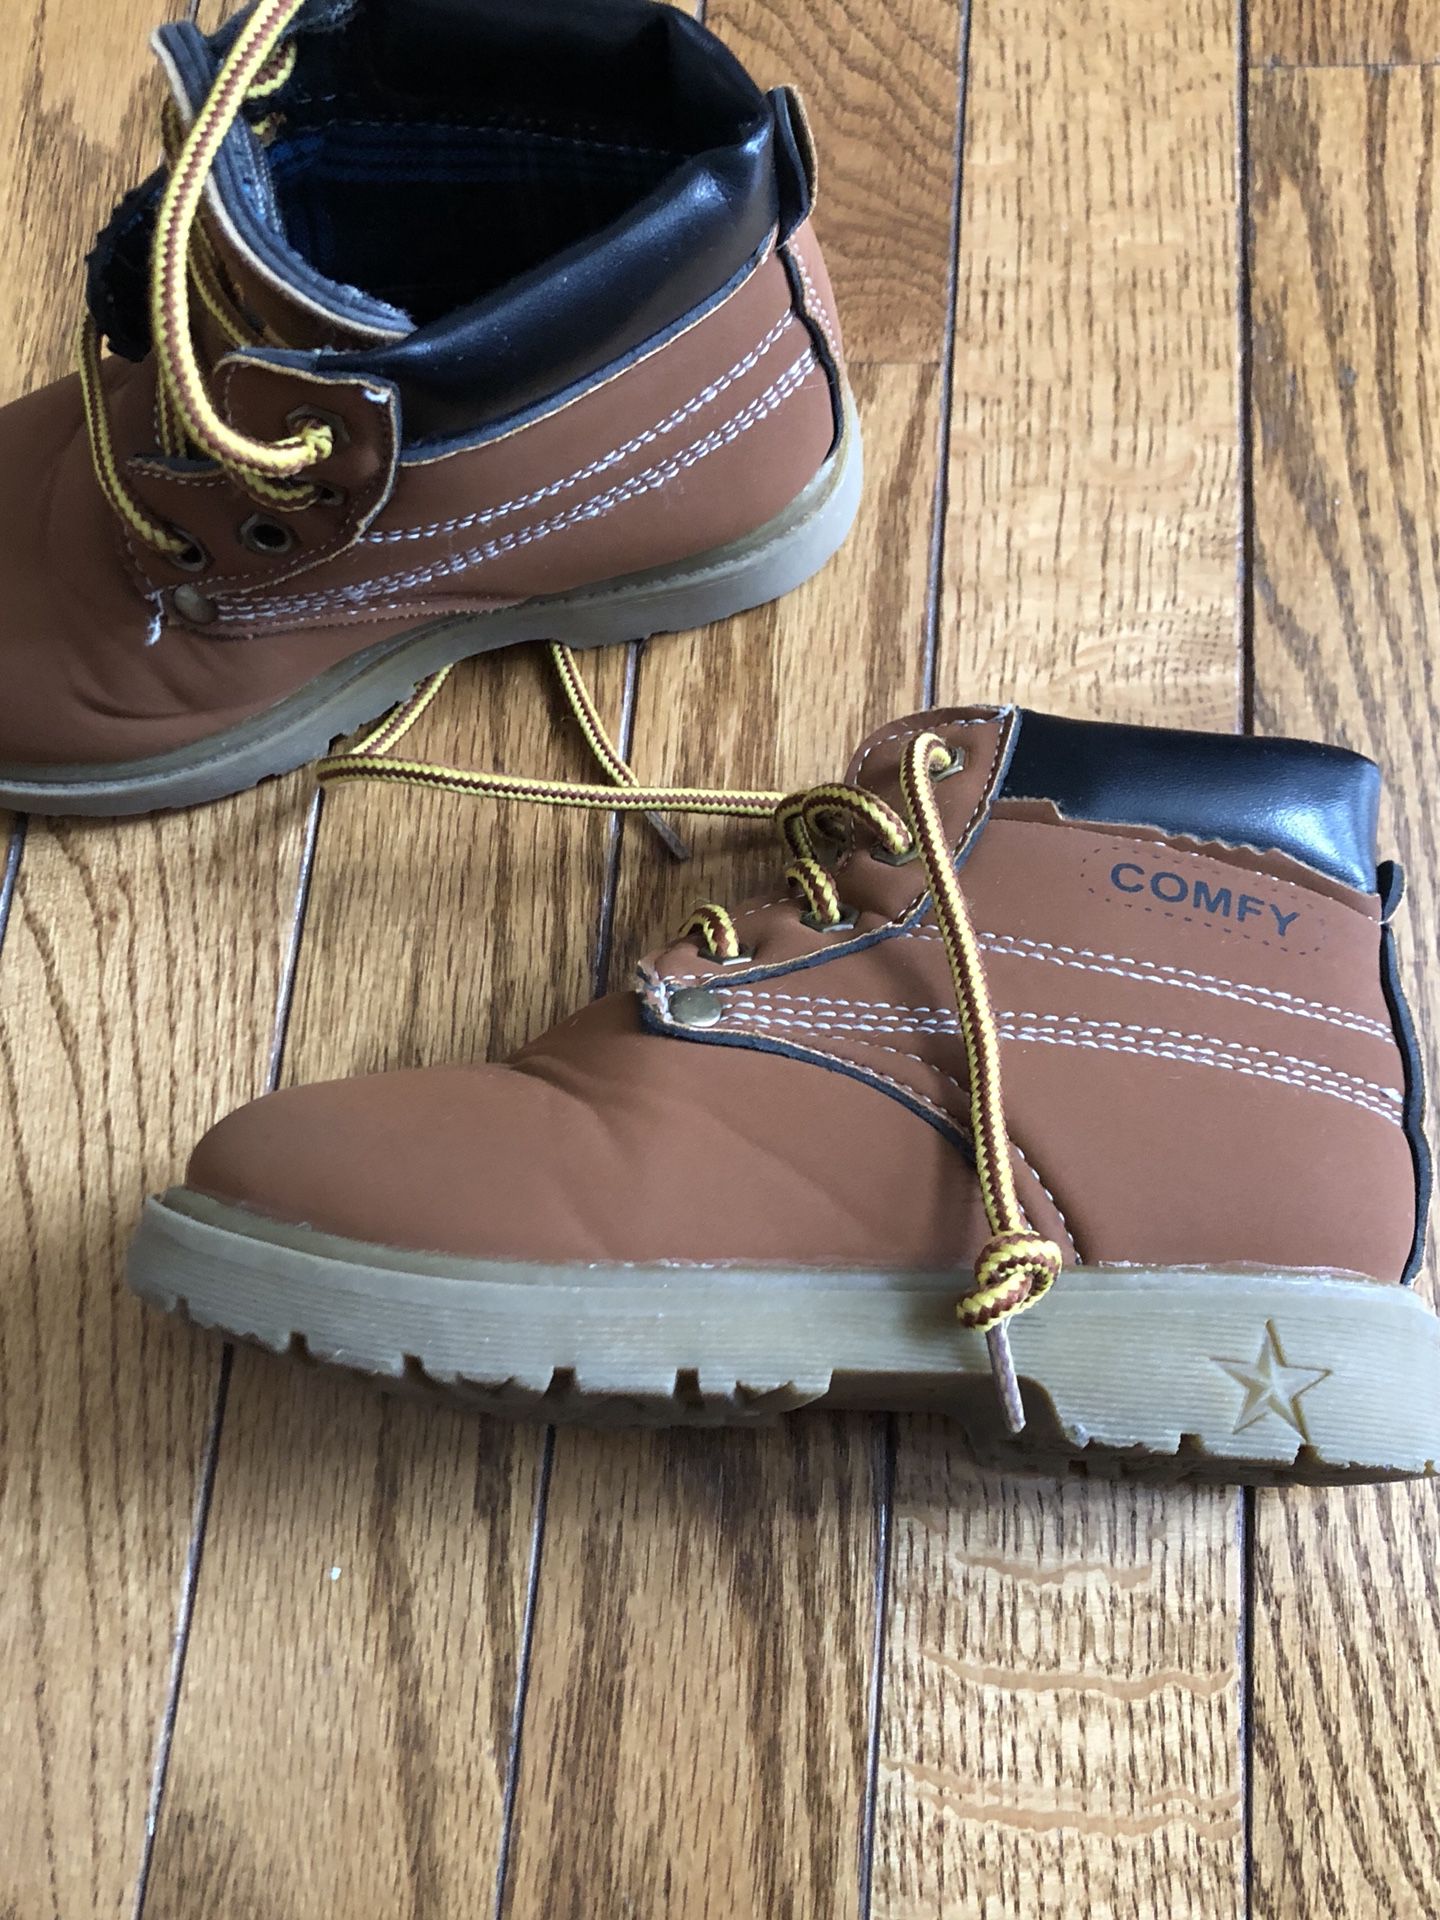 Toddler boots size 10/11